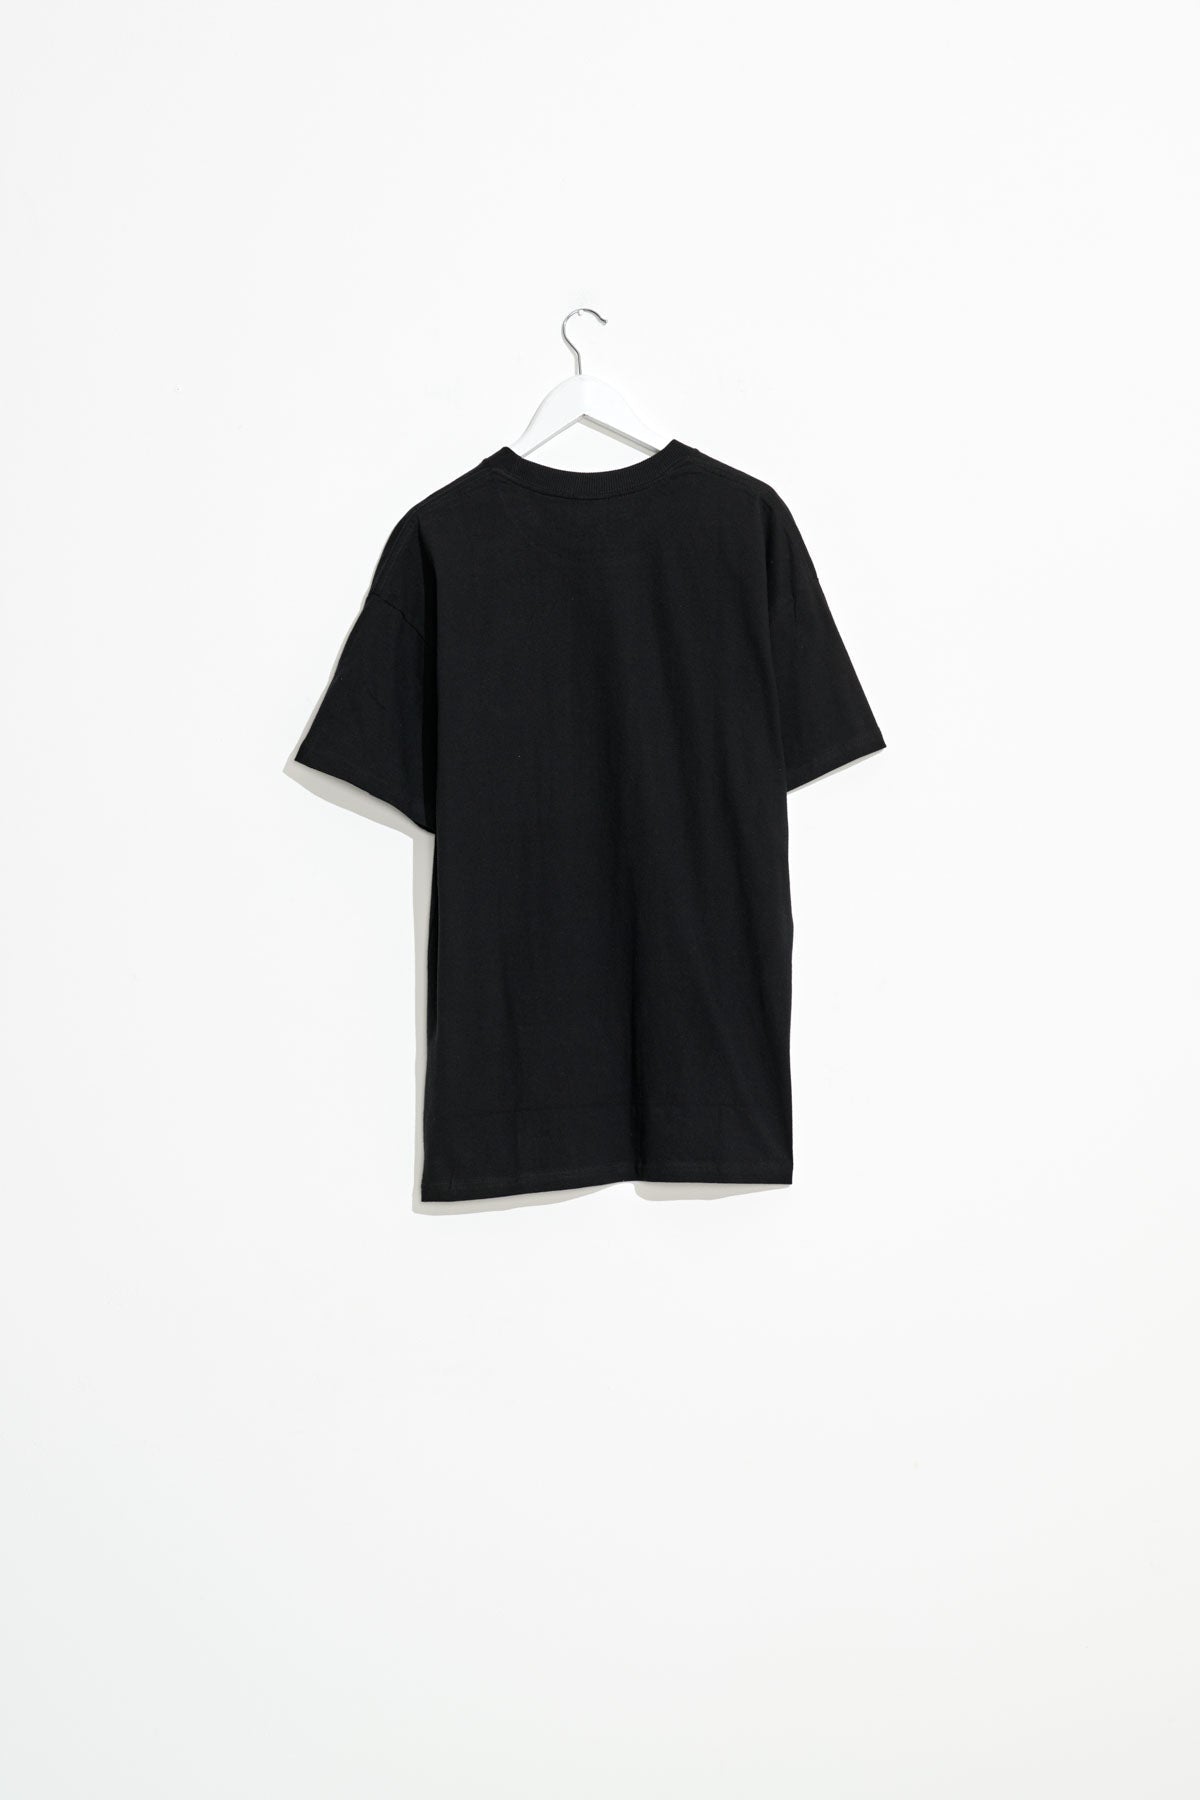 Misfit Shapes - Gone Moody 50-50 Aaa SS Tee - Washed Black